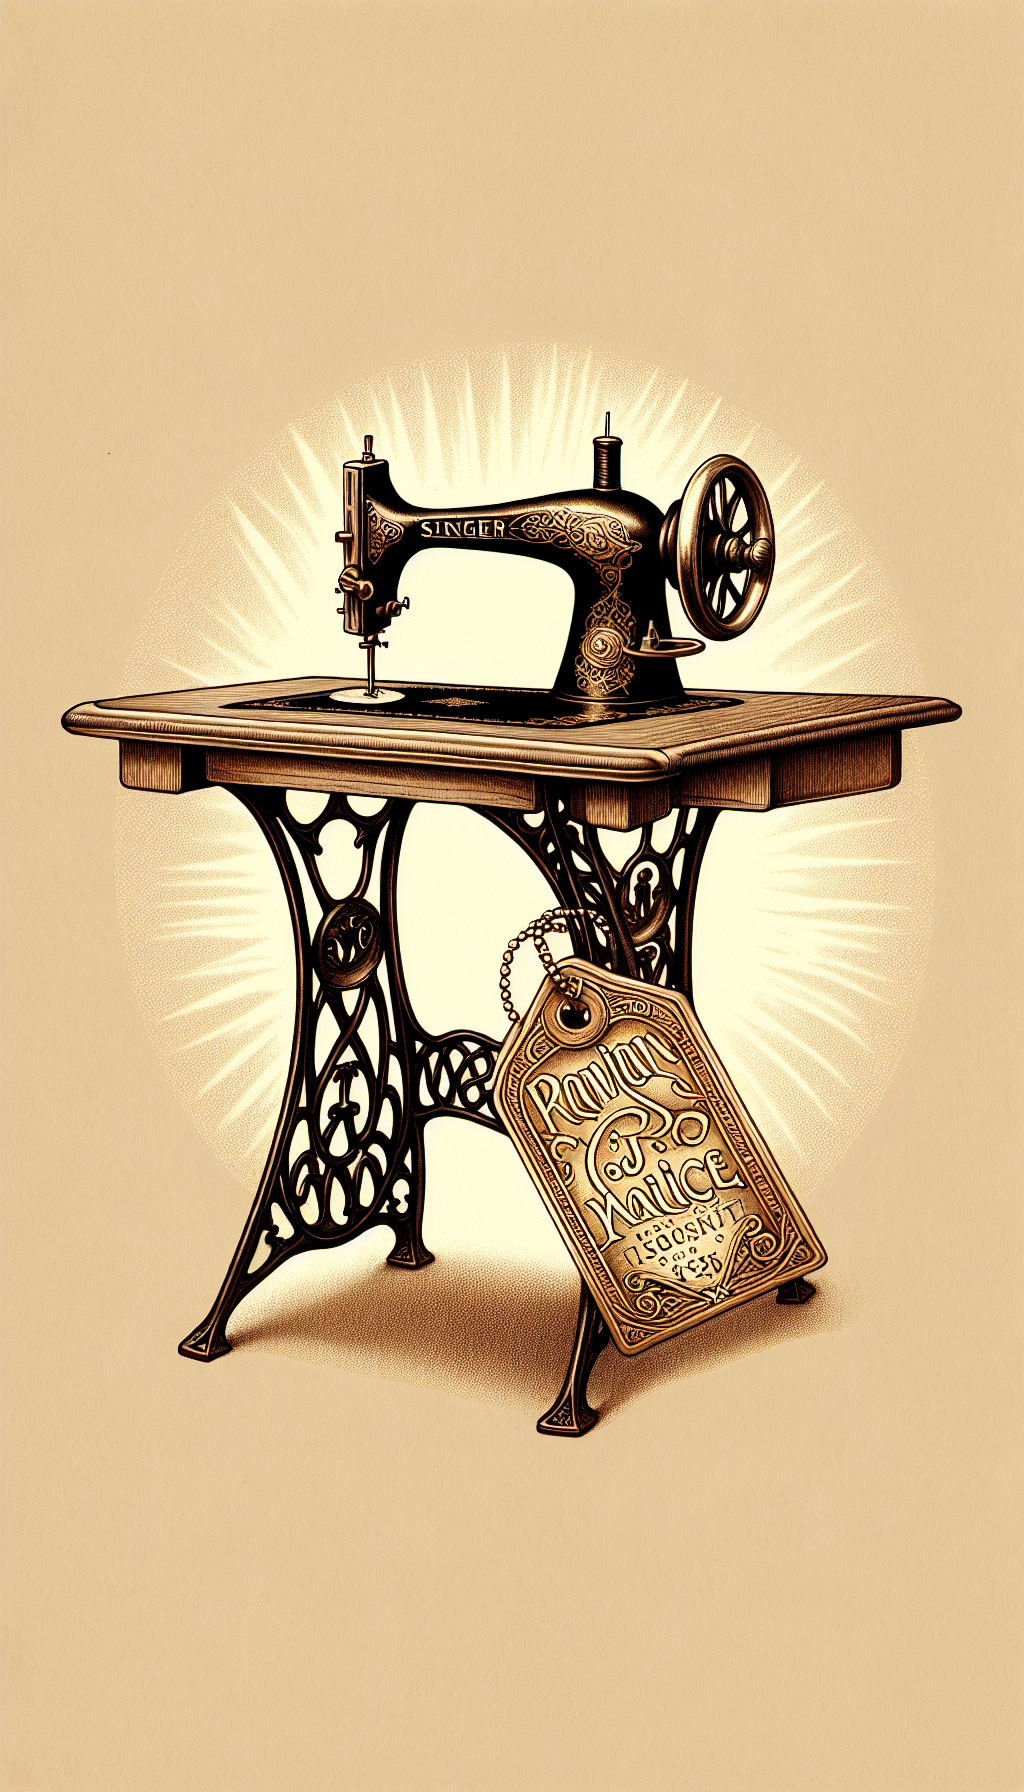 An elegant, sepia-toned illustration showcases an antique Singer sewing machine table, its cast-iron base intricate with Art Nouveau motifs. Hovering above, rendered in radiant gold, is a stylized price tag adorned with cursive inscriptions denoting its high value, symbolically transforming from a practical tool into a cherished relic, capturing the essence of both function and treasured antique.